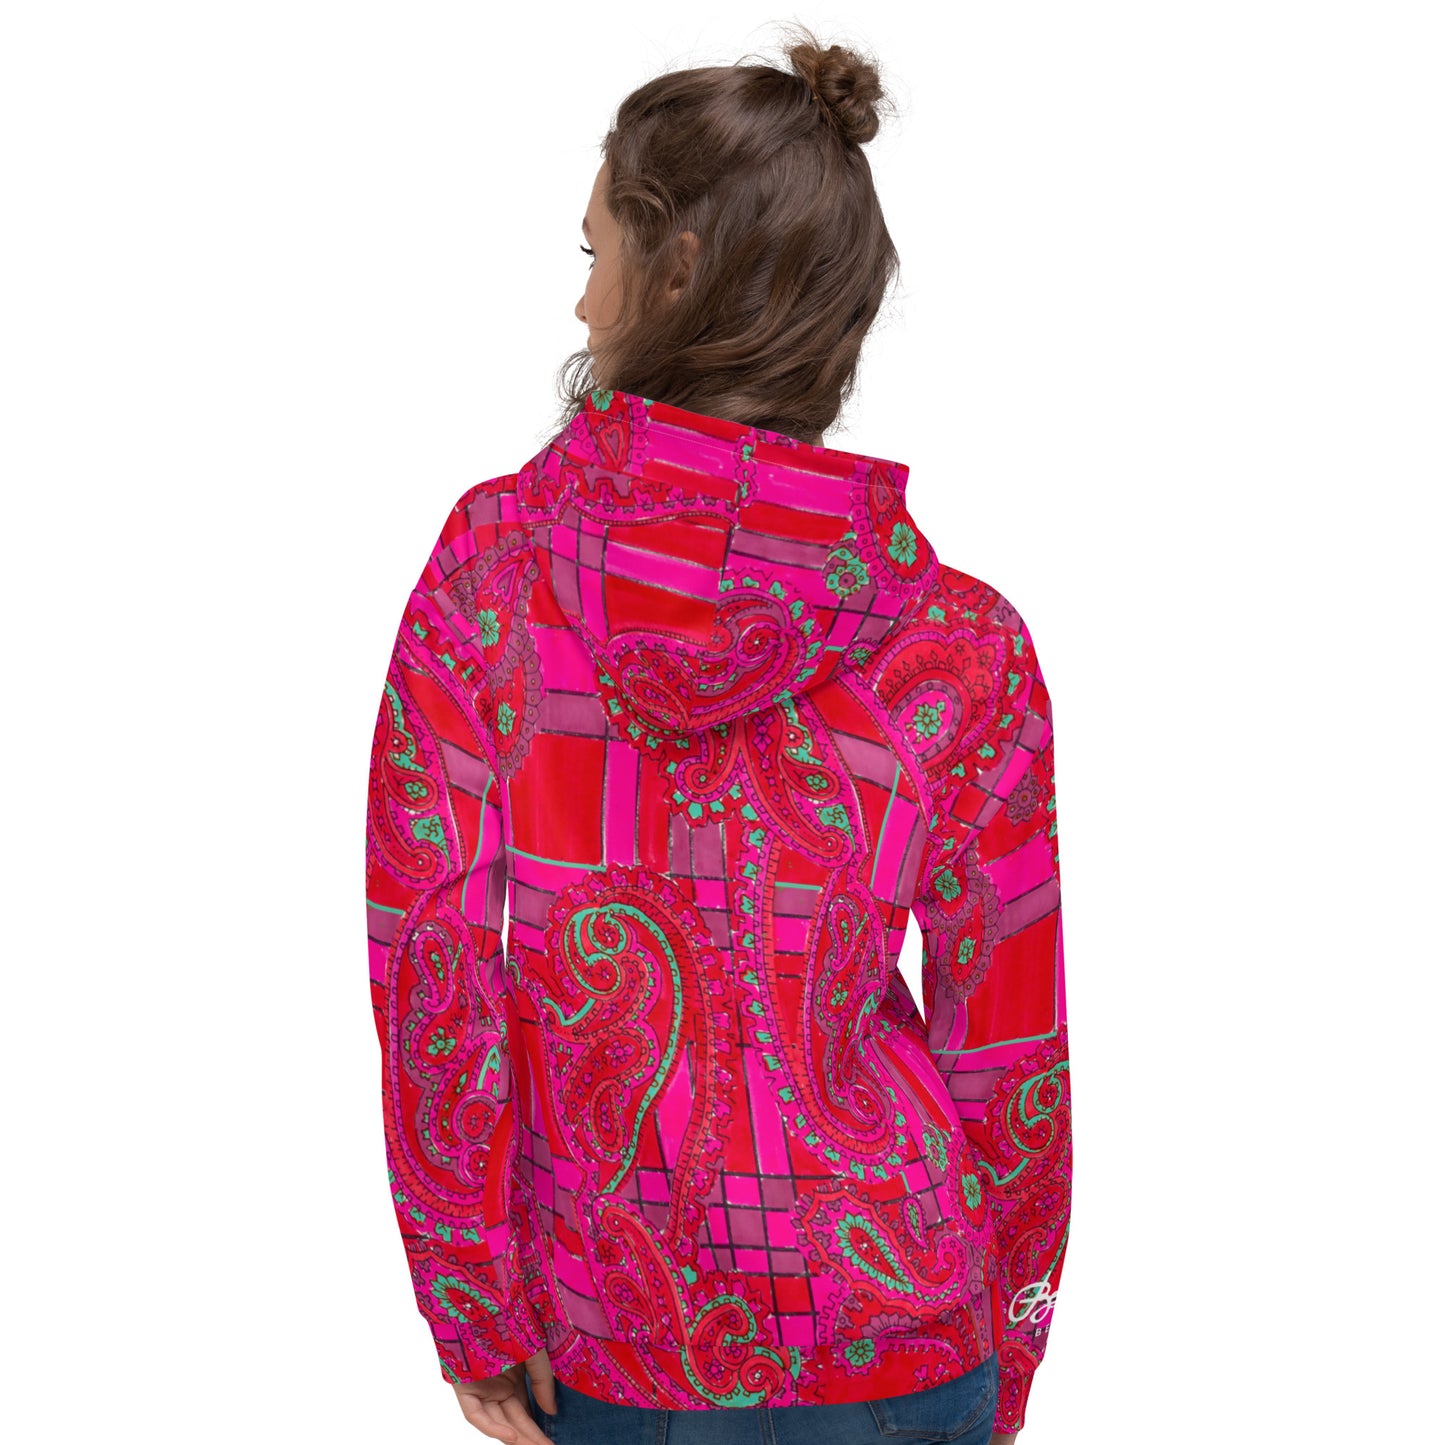 Recycled Unisex Hoodie - Bright Fuscia and Red Poppy Paisley on Plaid - Women